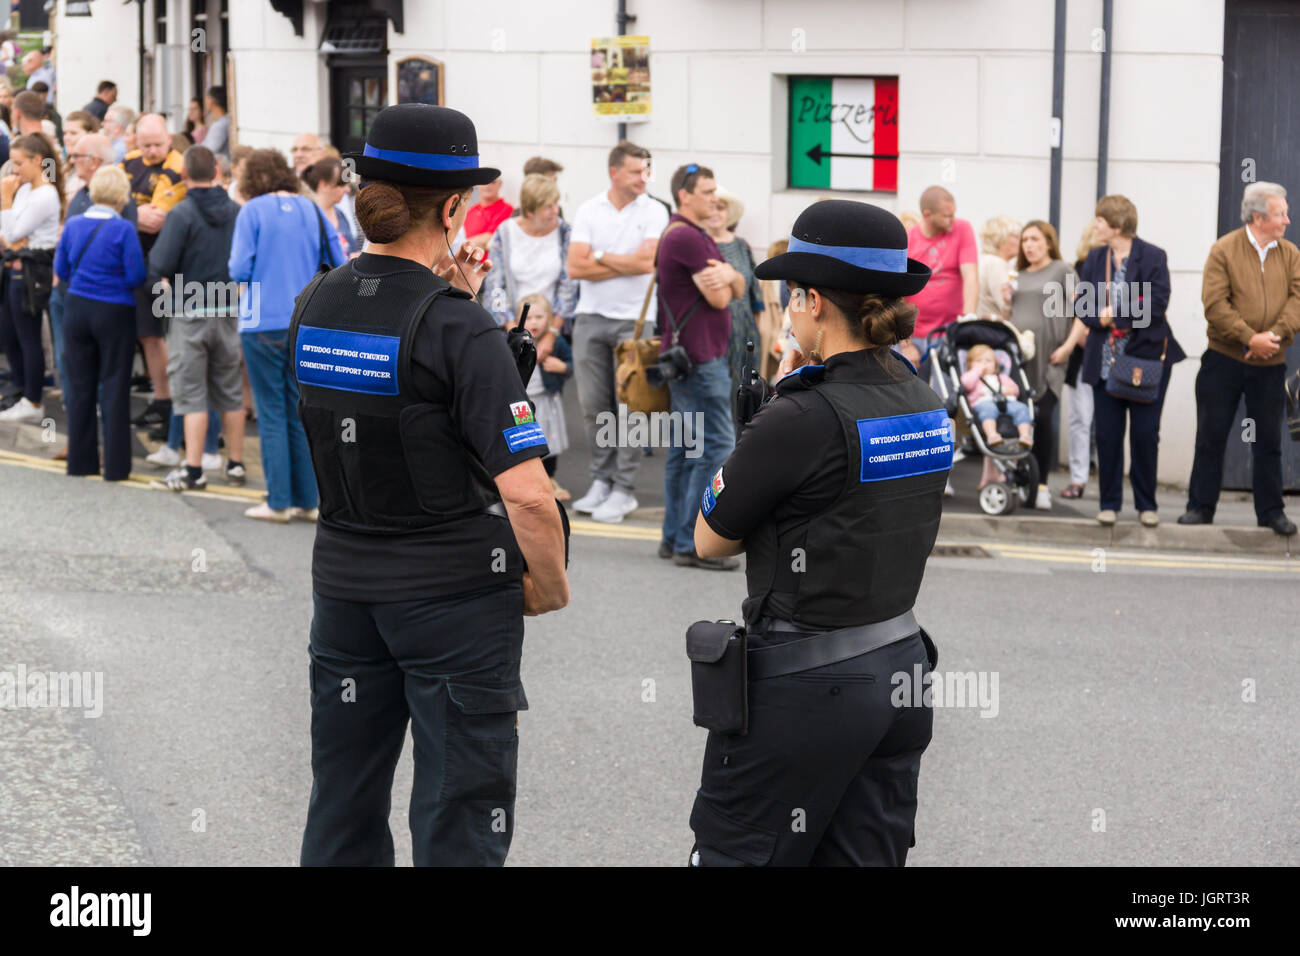 Female Police and Community Safety Officers or PCSO on duty providing support to the regular police at the Eisteddfod street parade in Llangollen Stock Photo